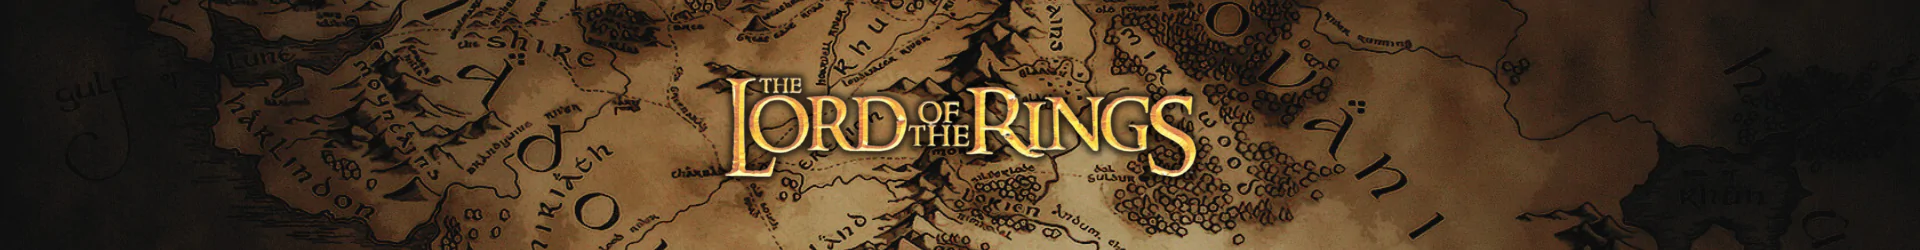 Lord of the Rings brettspiele banner